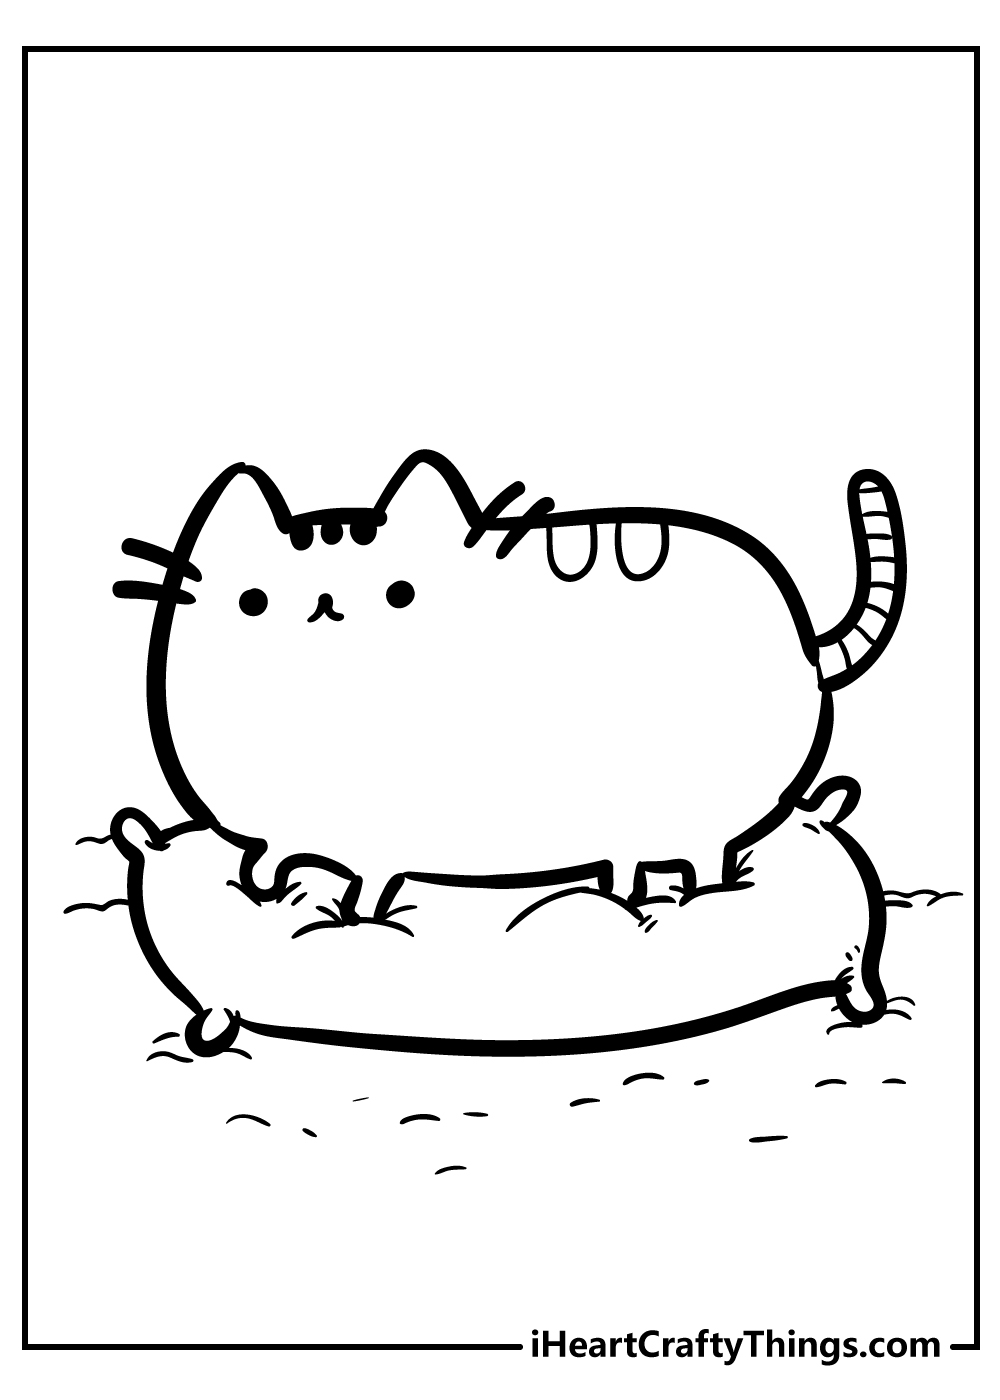 pusheen printable colouring images for kids free